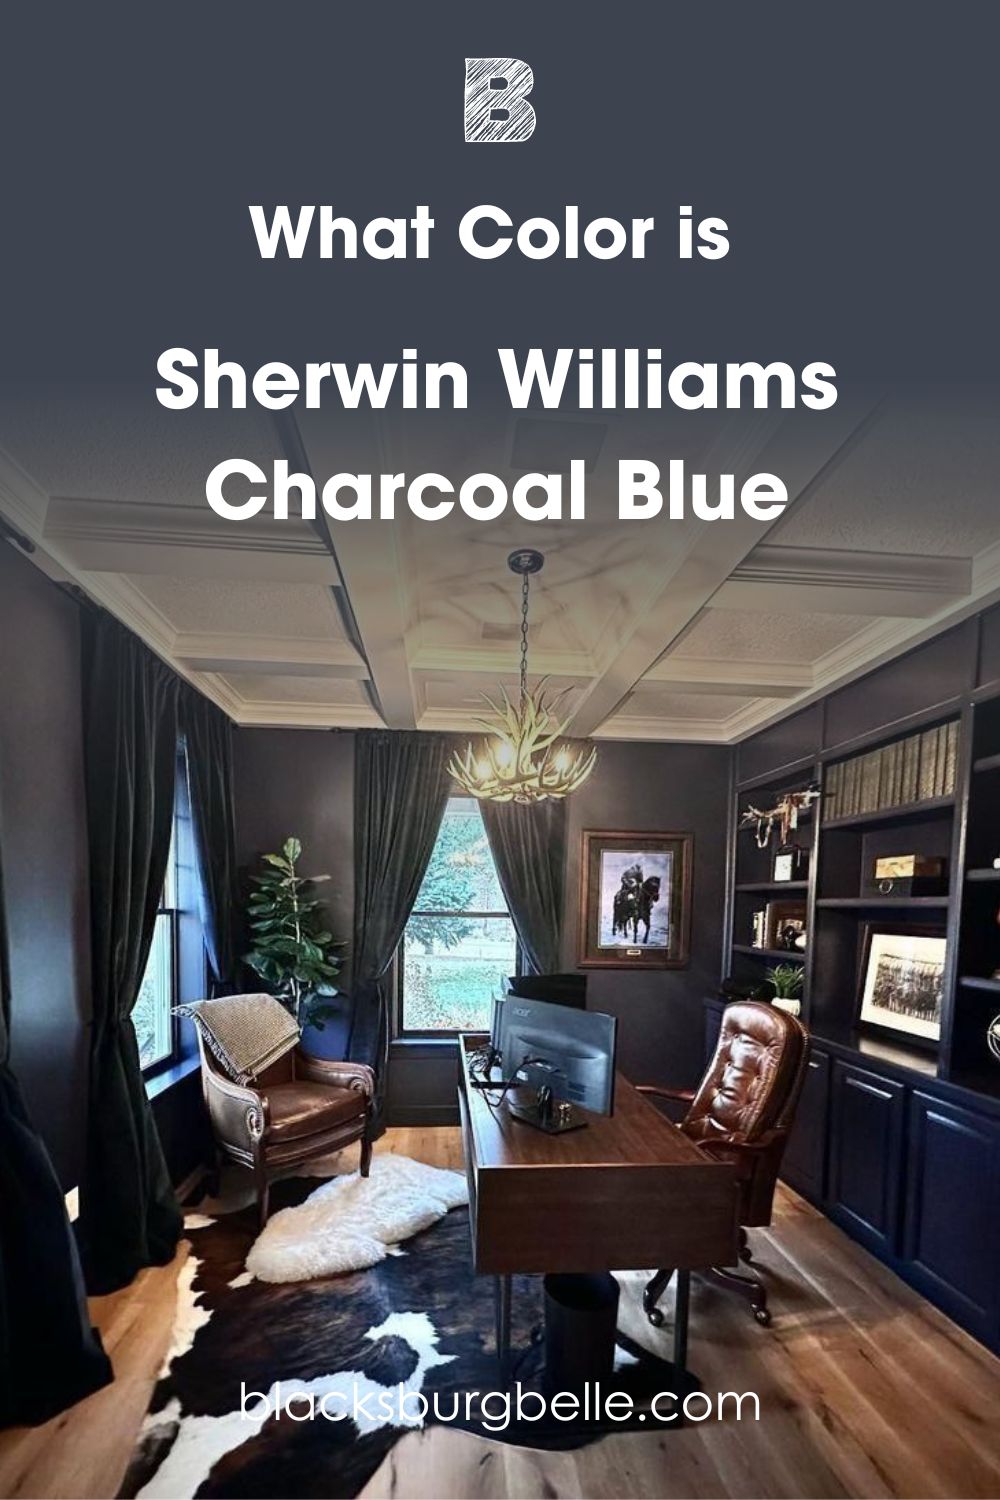 Sherwin-Williams Charcoal Blue SW 2739